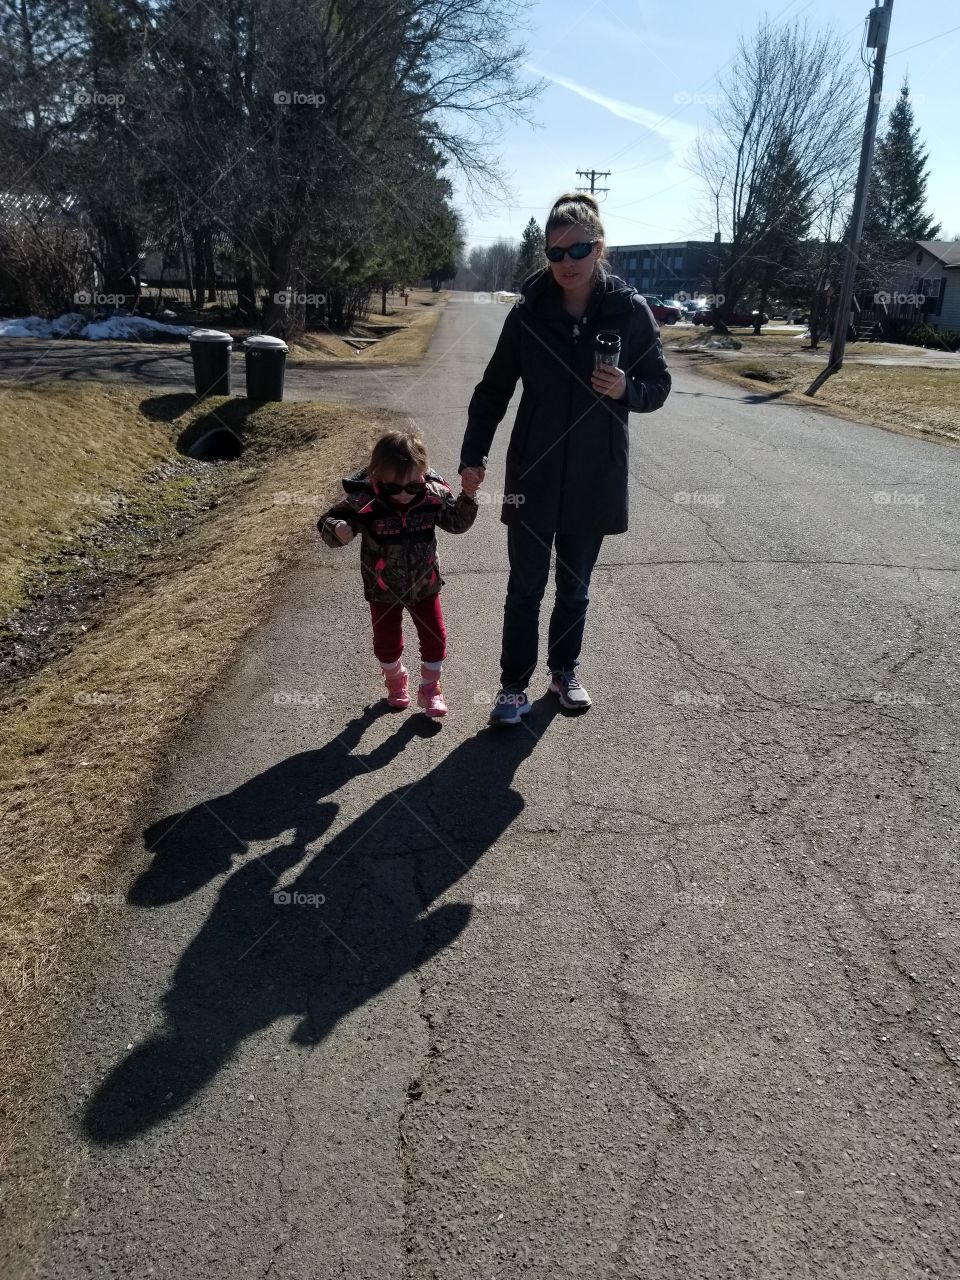 enjoying  the  day out for a  walk.